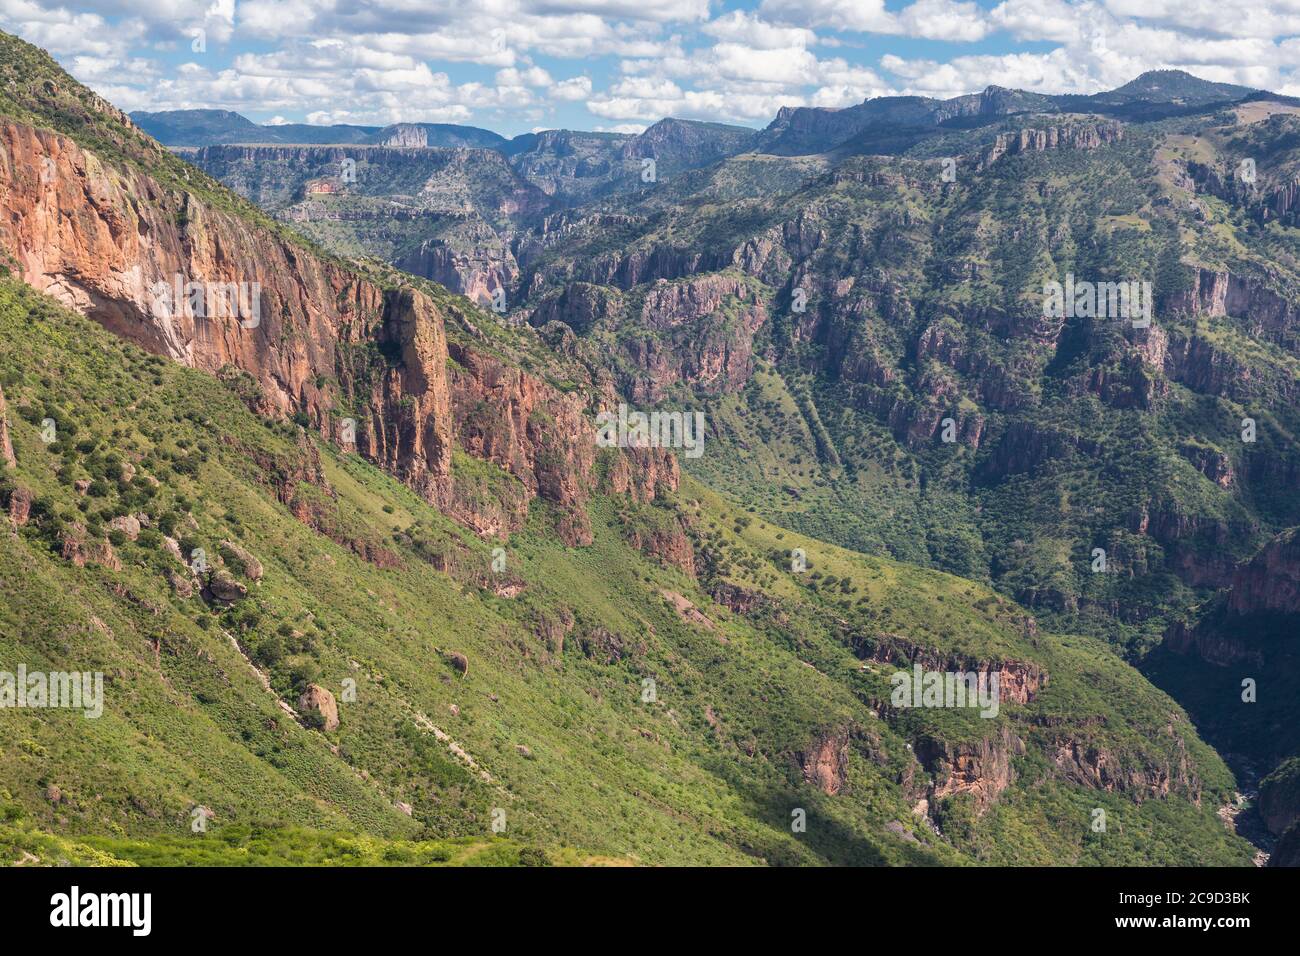 Batopilas Canyon Scenic View, Chihuahua State, Mexico.  Part of the Copper Canyon Complex.  Batopilas River at lower right corner. Stock Photo